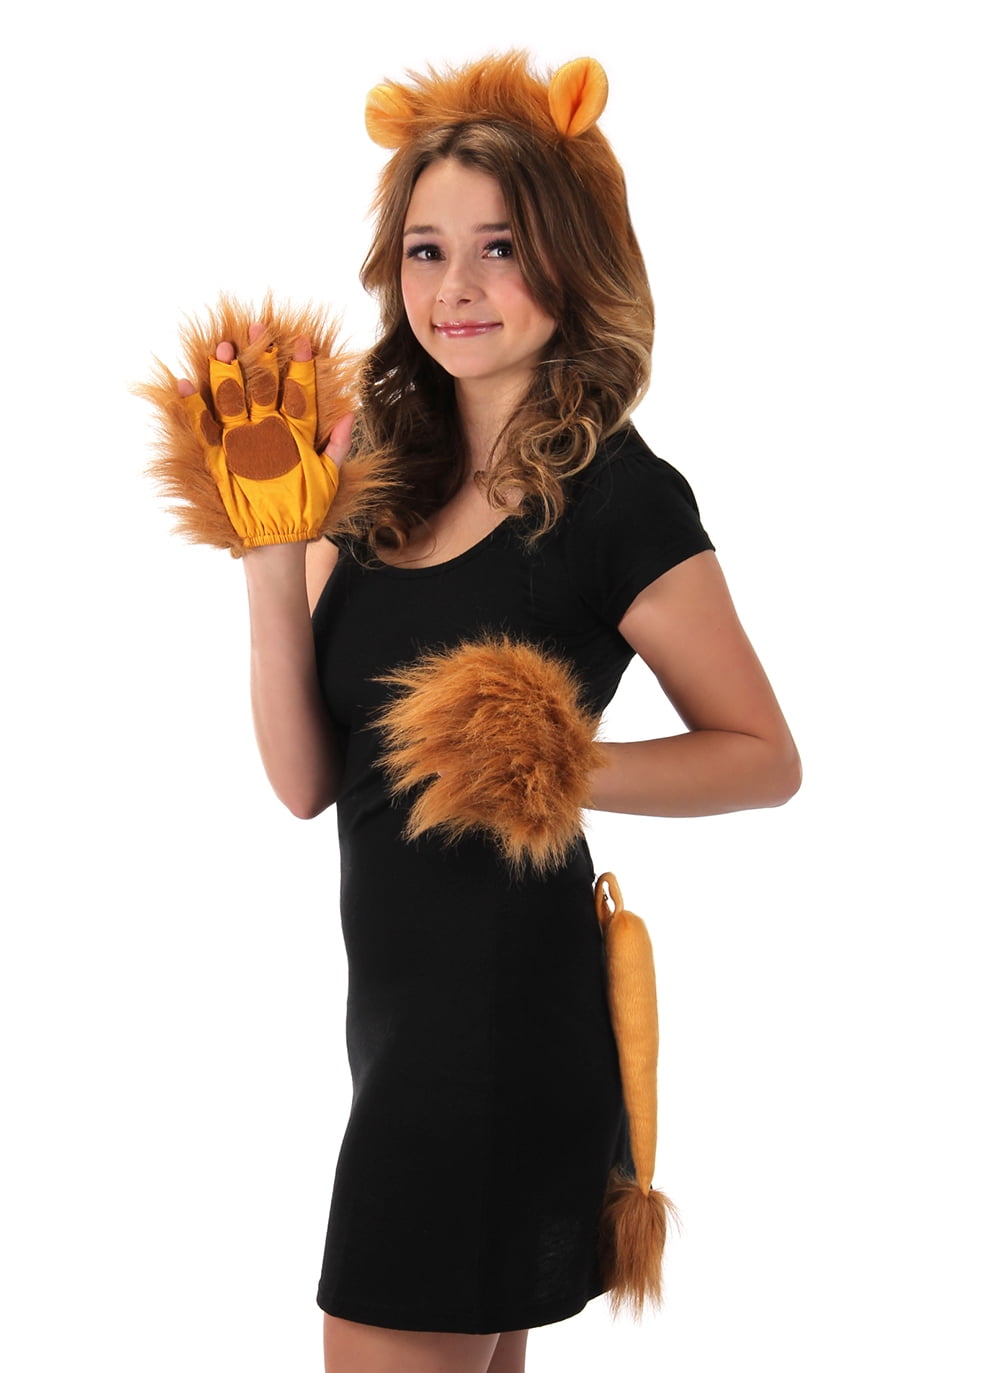 LION Ears and Tail Set Headband Fancy Dress Costume Accessory ONE SIZE FITS ALL 